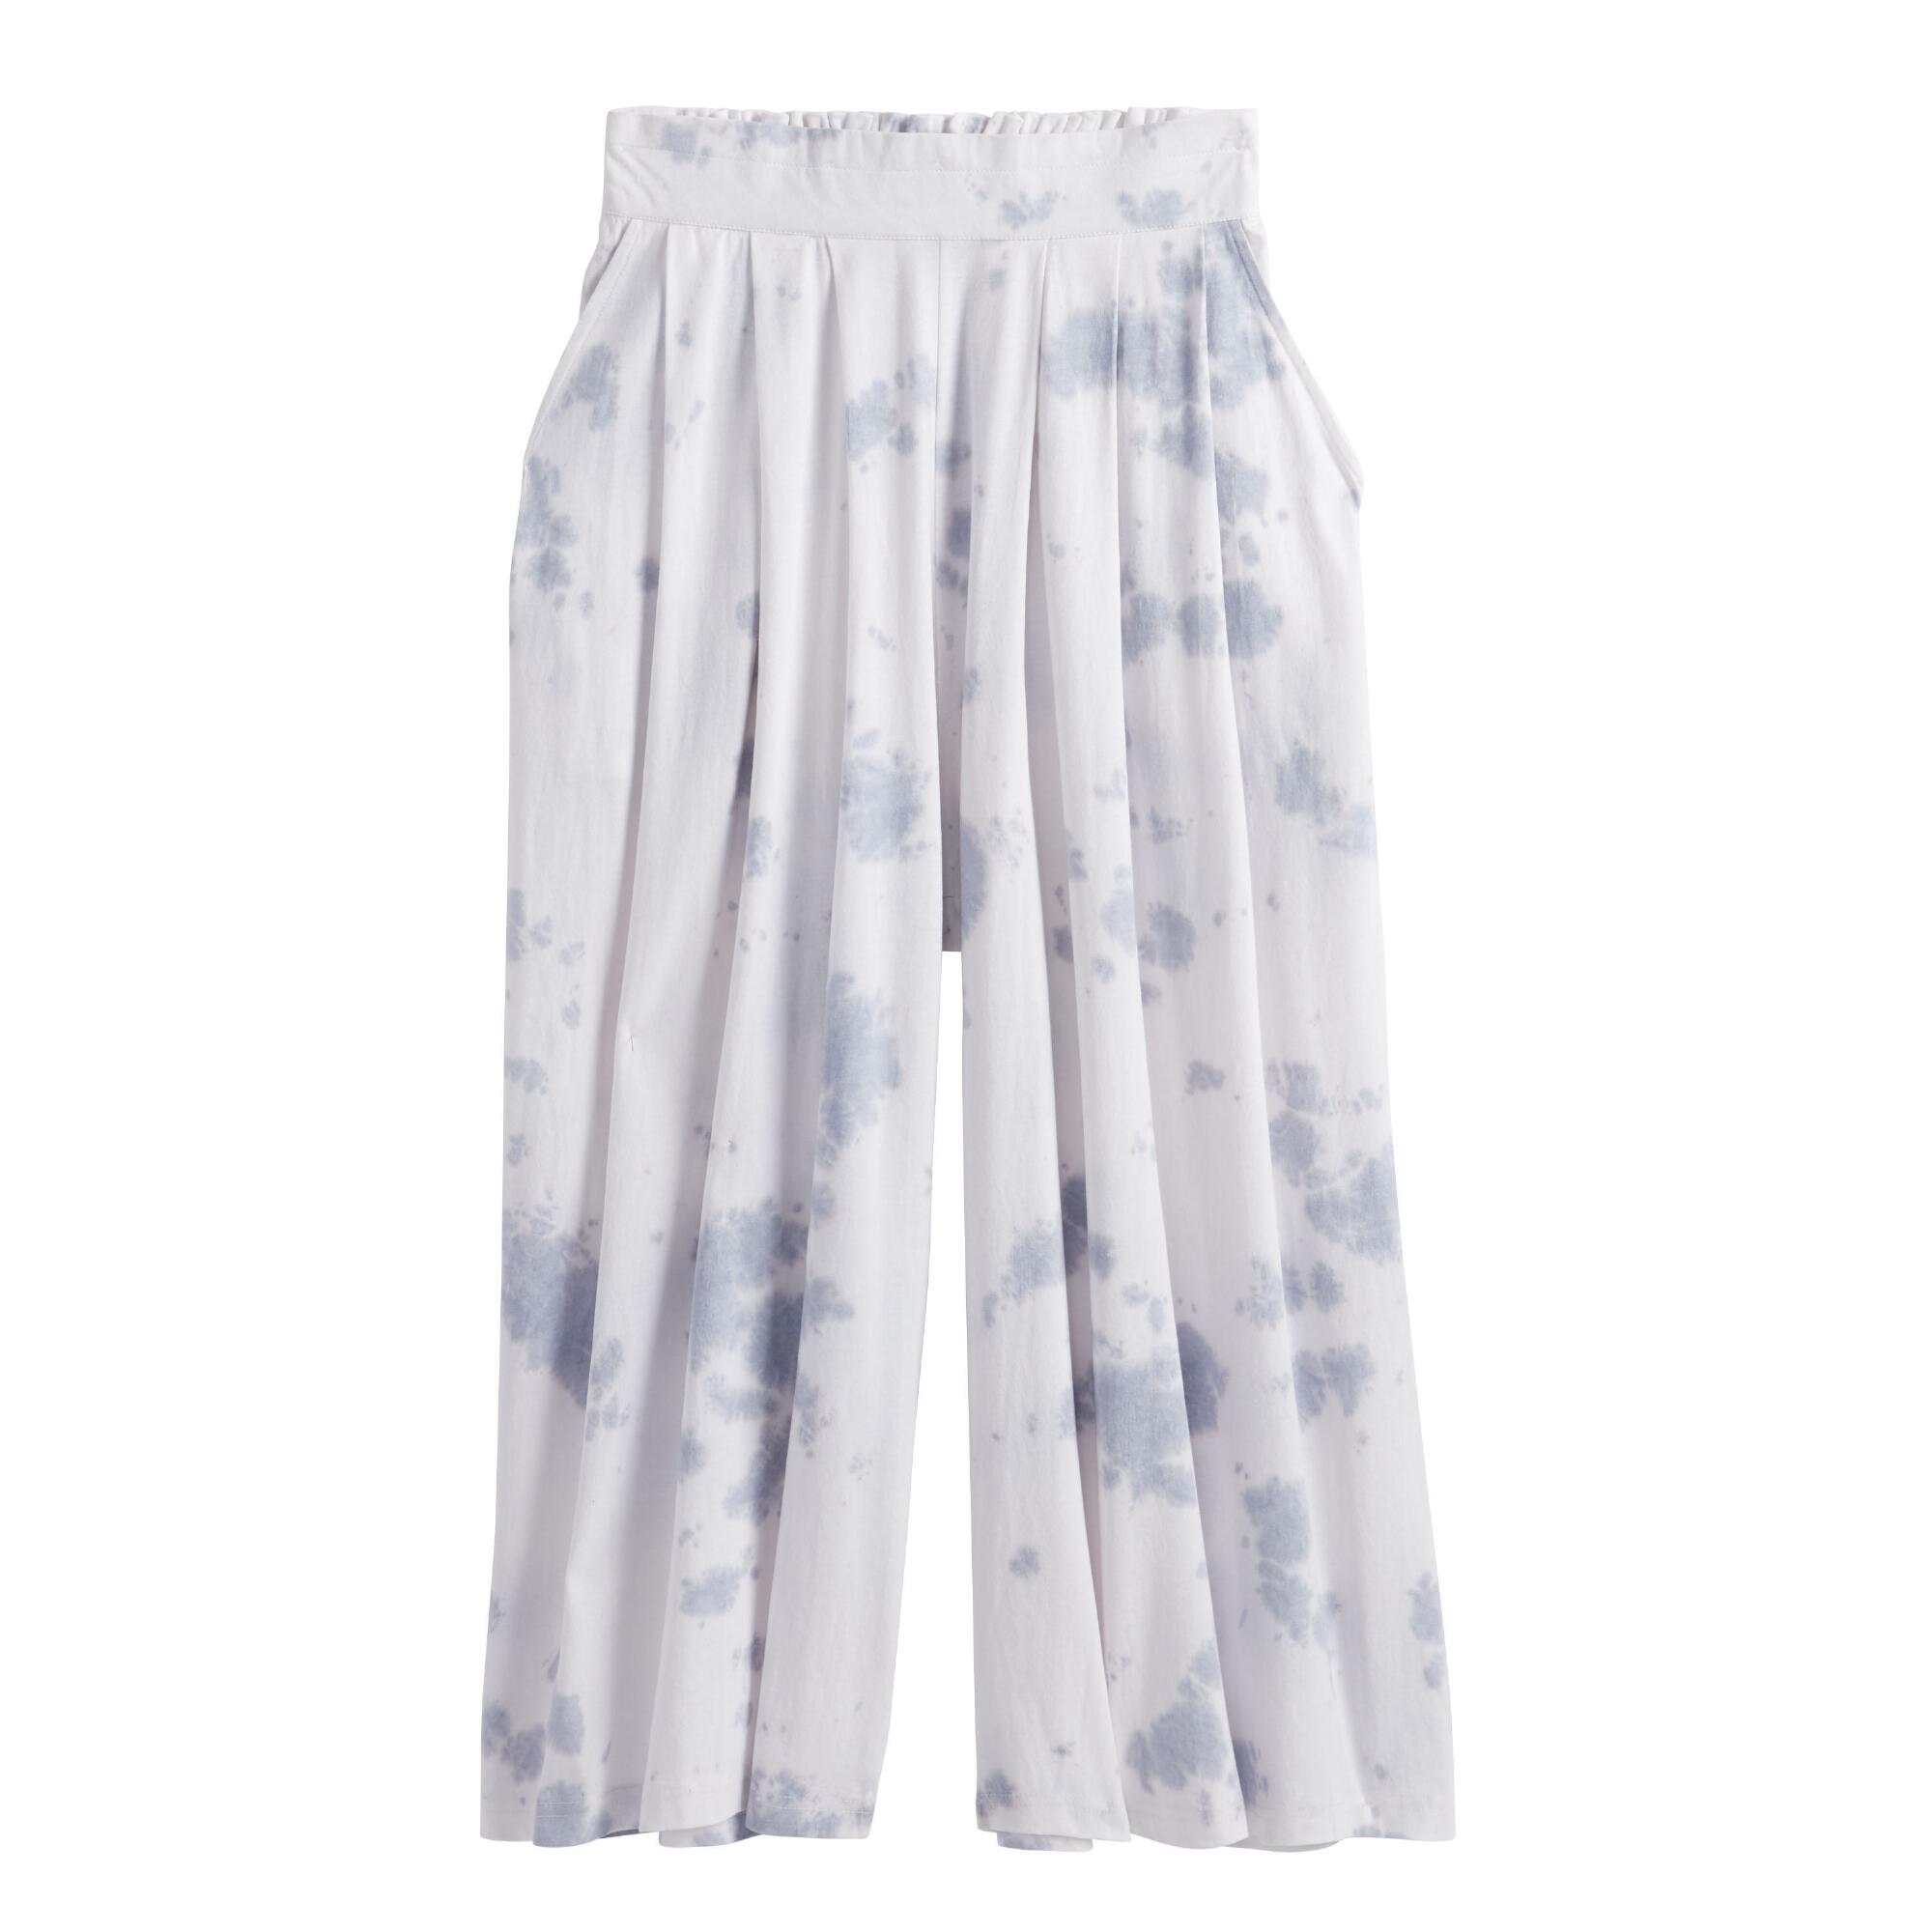 Light Blue And White Tie Dye Cloud Lounge Pants With Pockets - Small by World Market